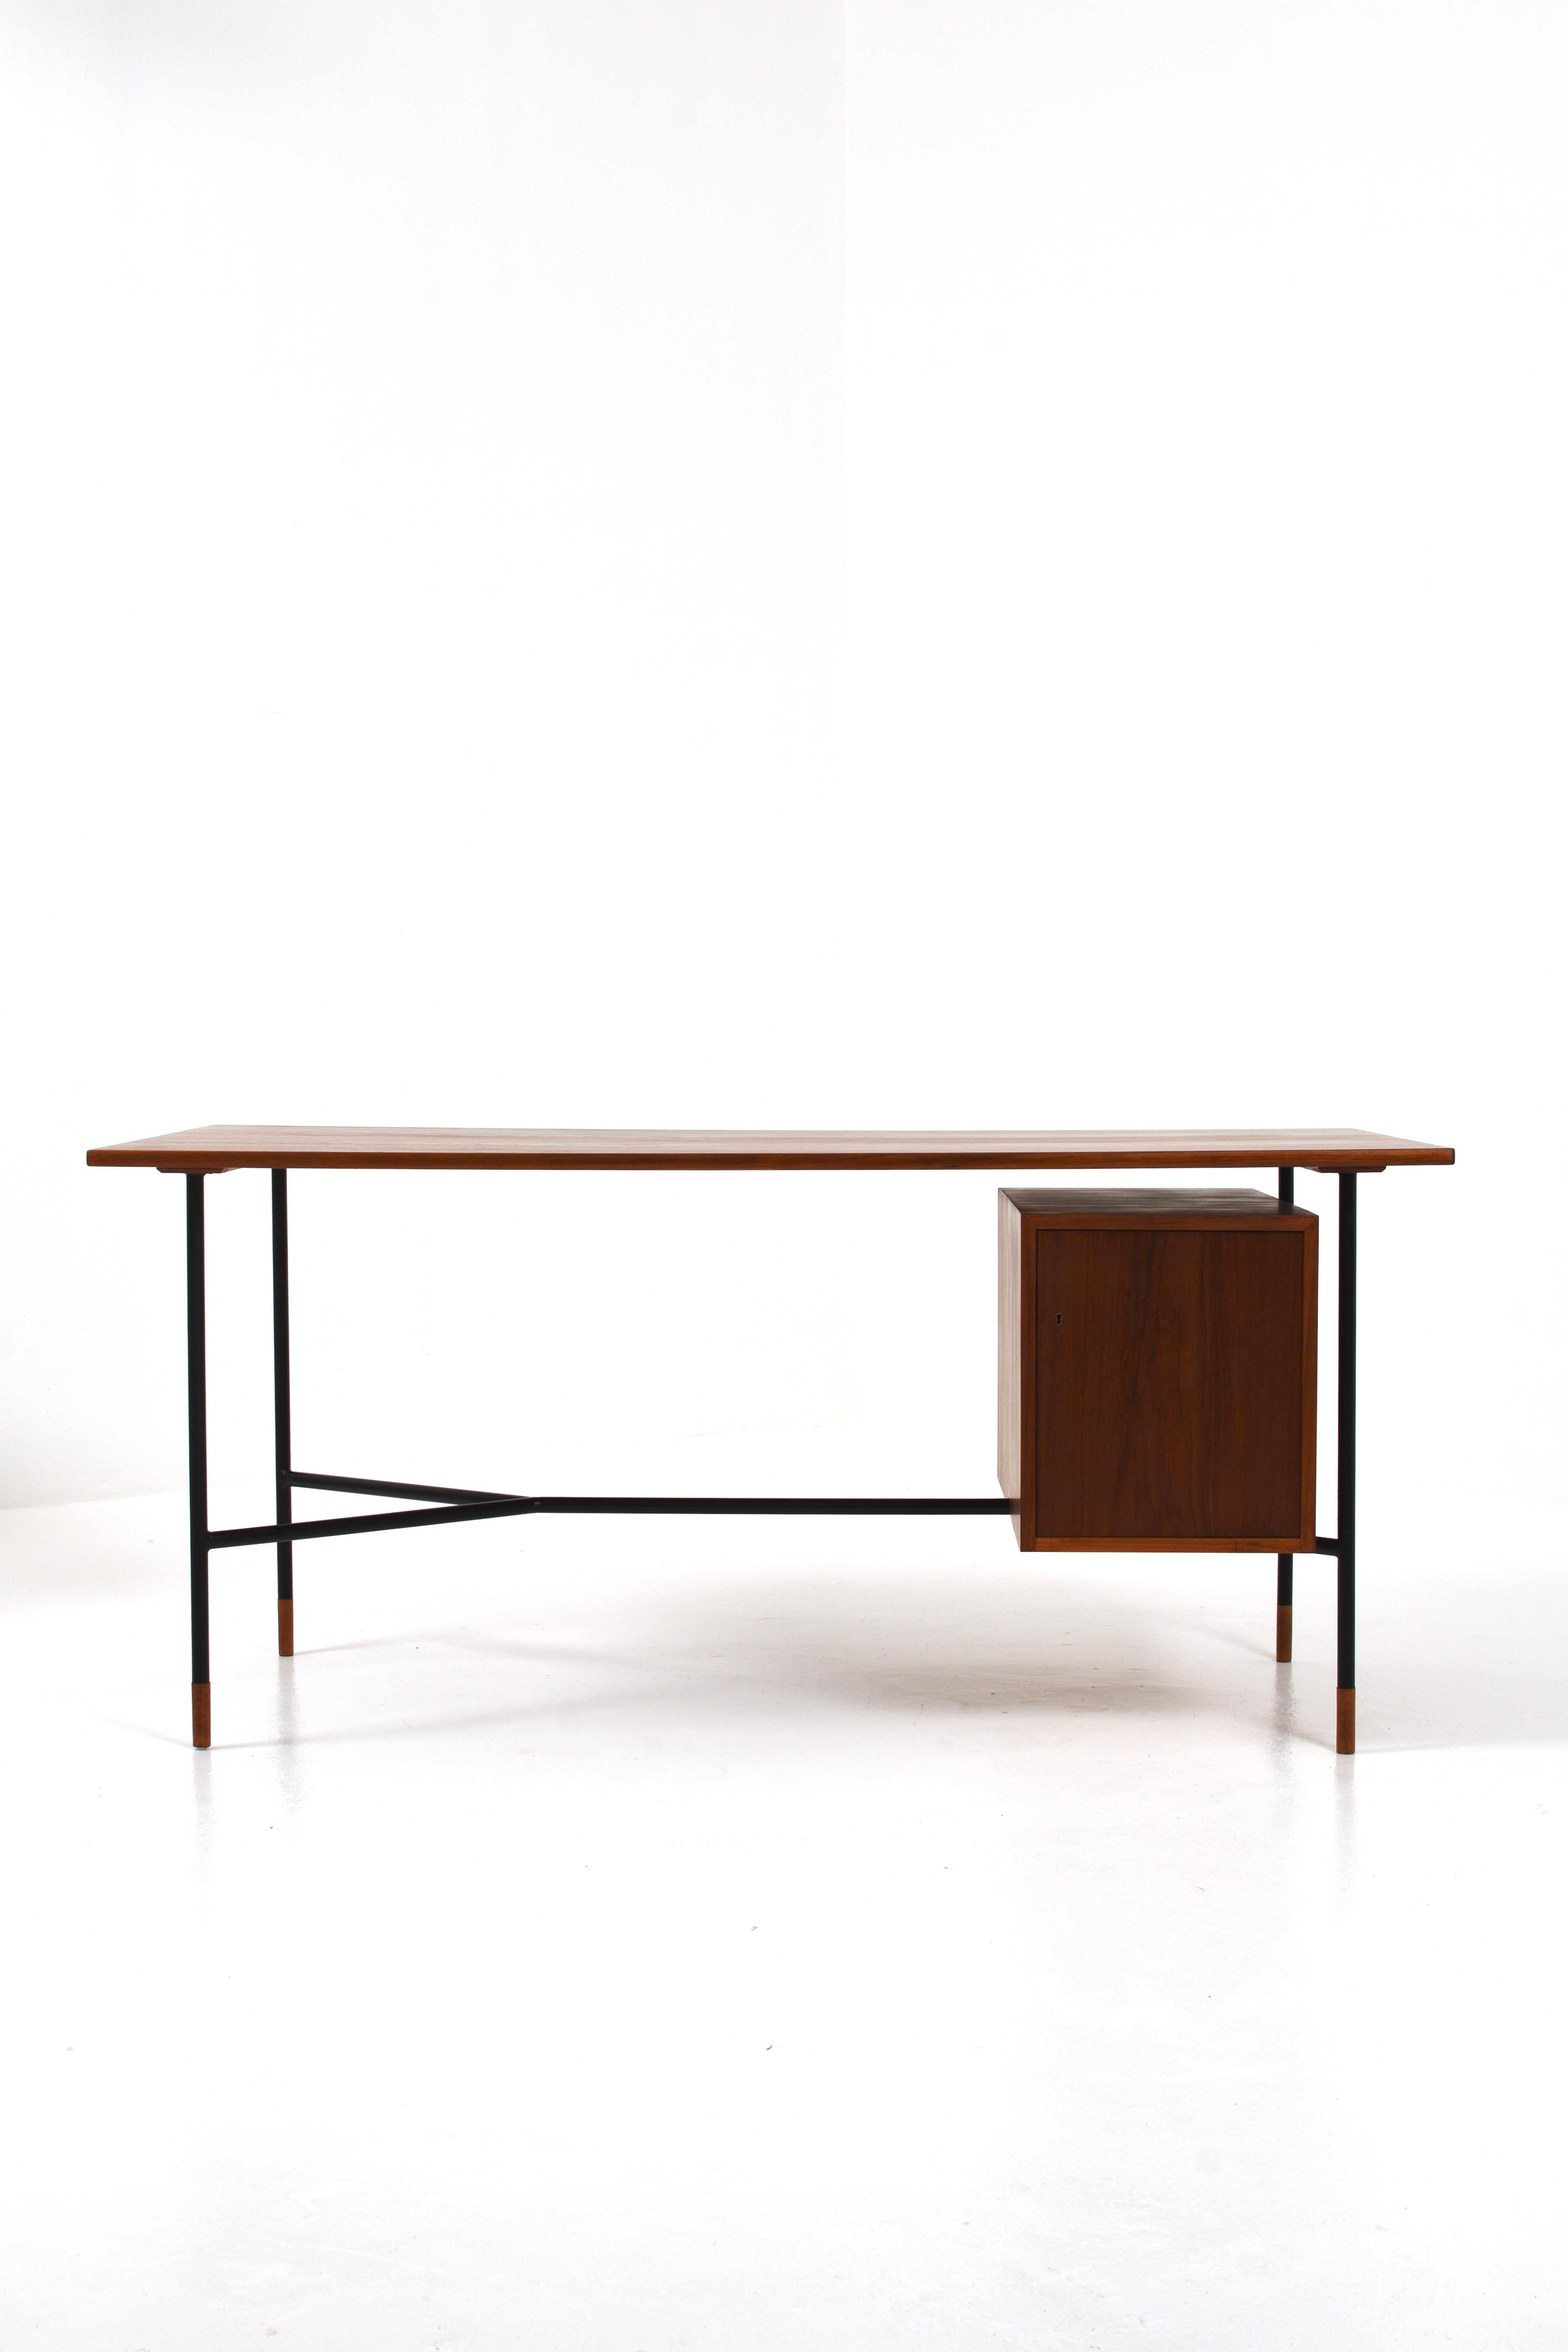 Rare Desk H-55 by Åke Hassbjer in teak and steel base, 1950s For Sale 6